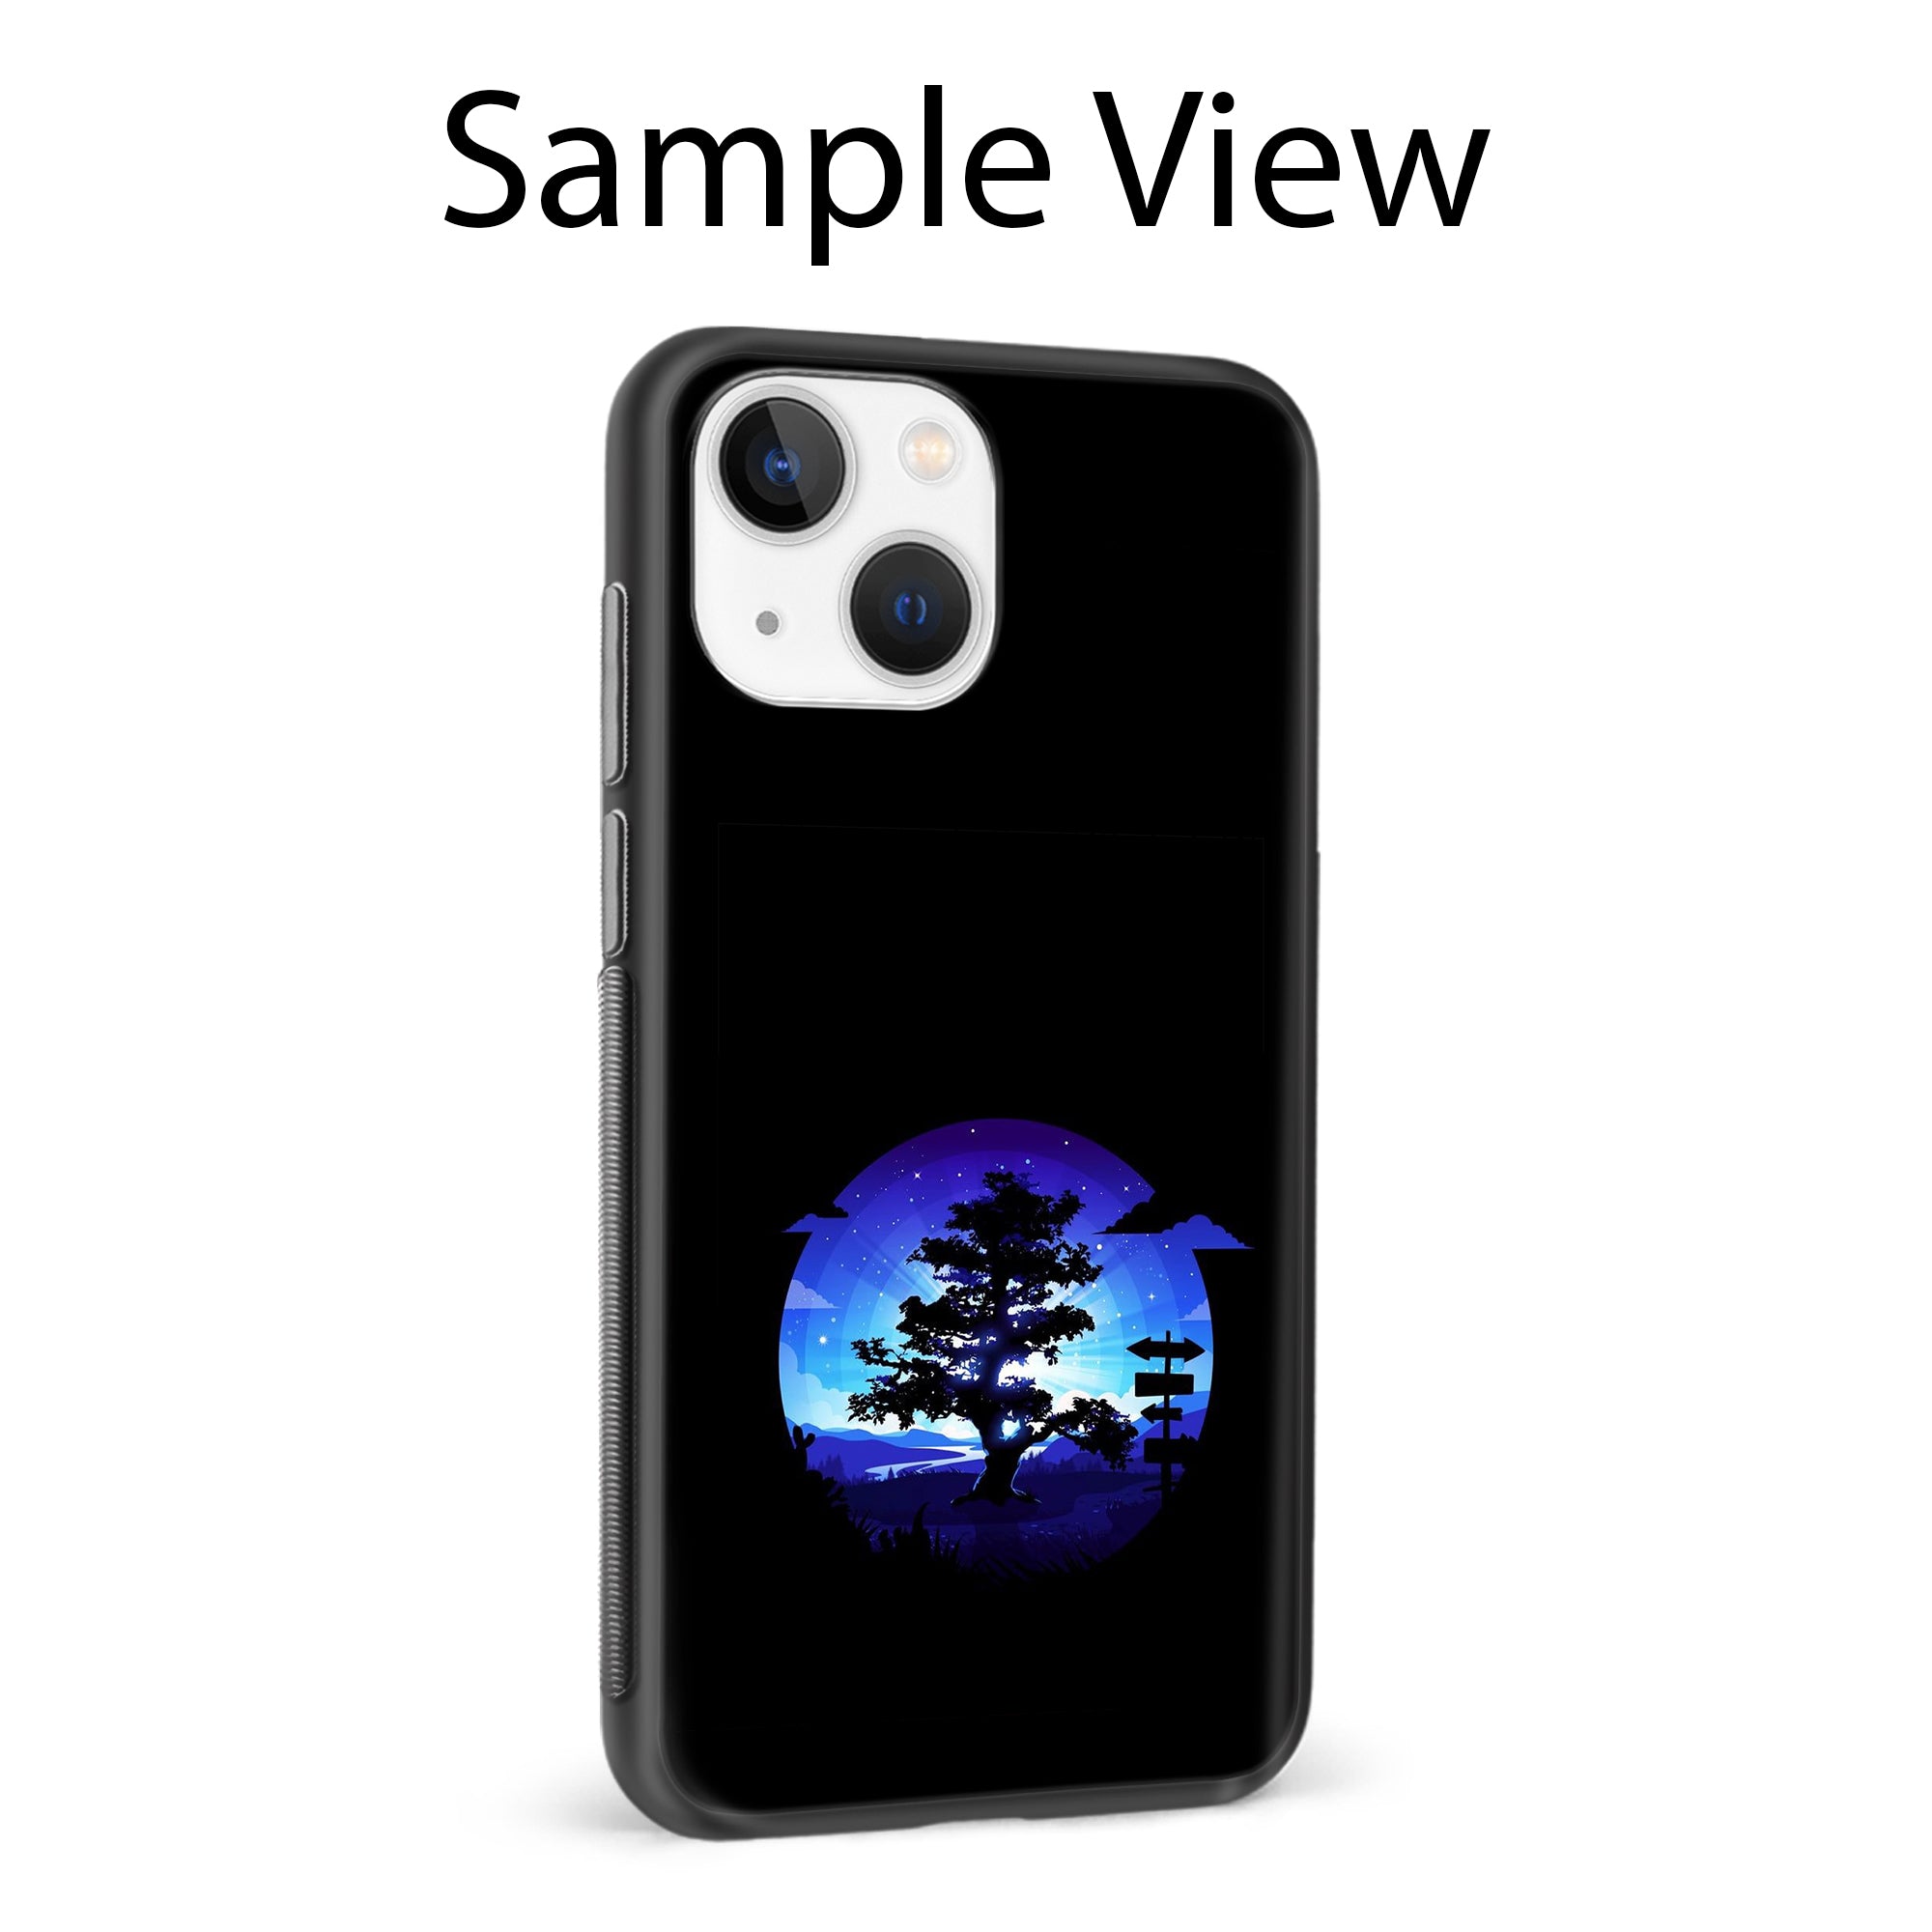 Buy Night Tree Metal-Silicon Back Mobile Phone Case/Cover For Samsung Galaxy M51 Online